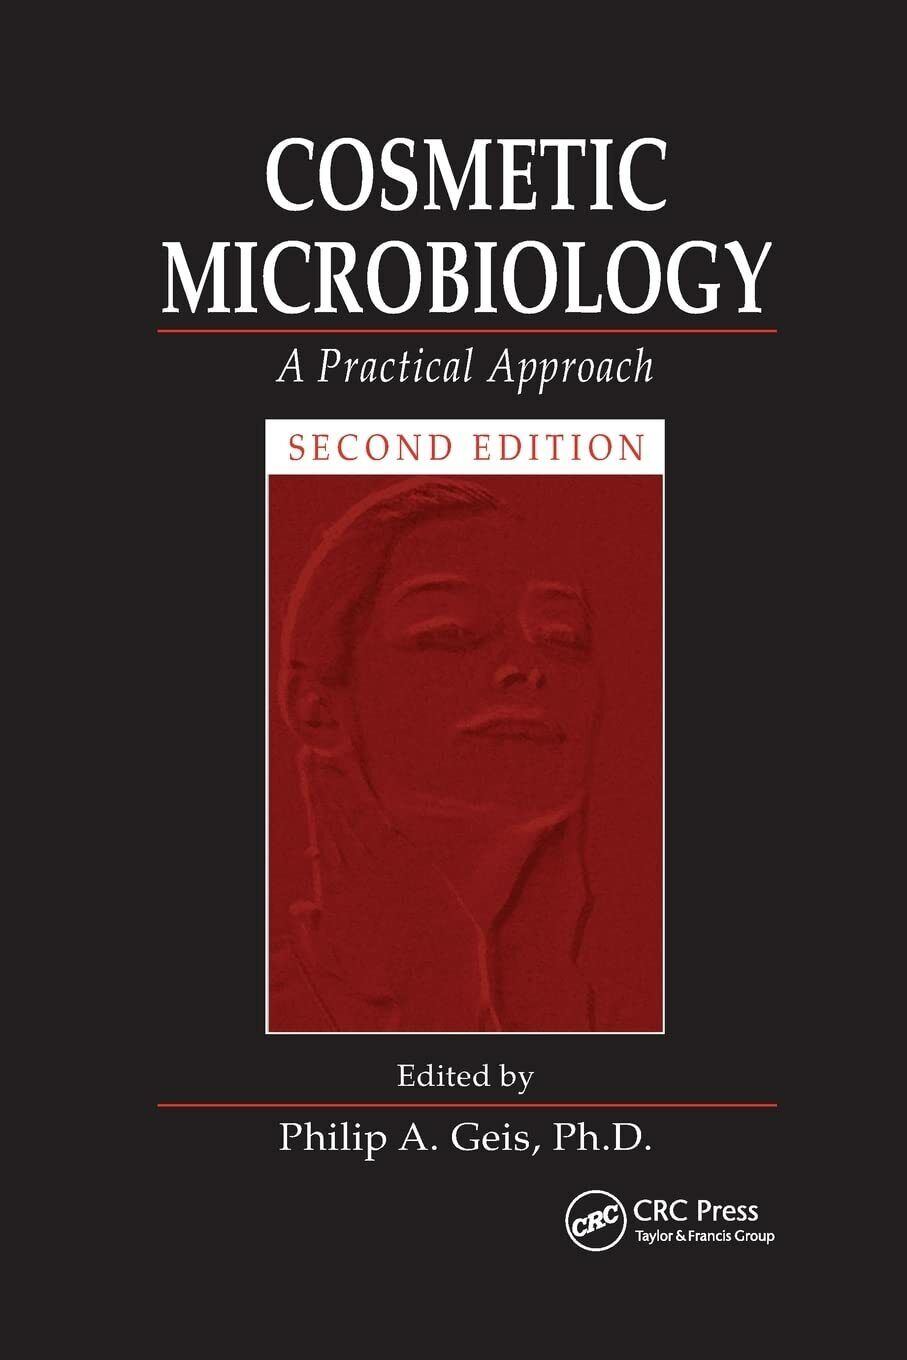 Cosmetic Microbiology - Practical Approach - CRC Press, 2006